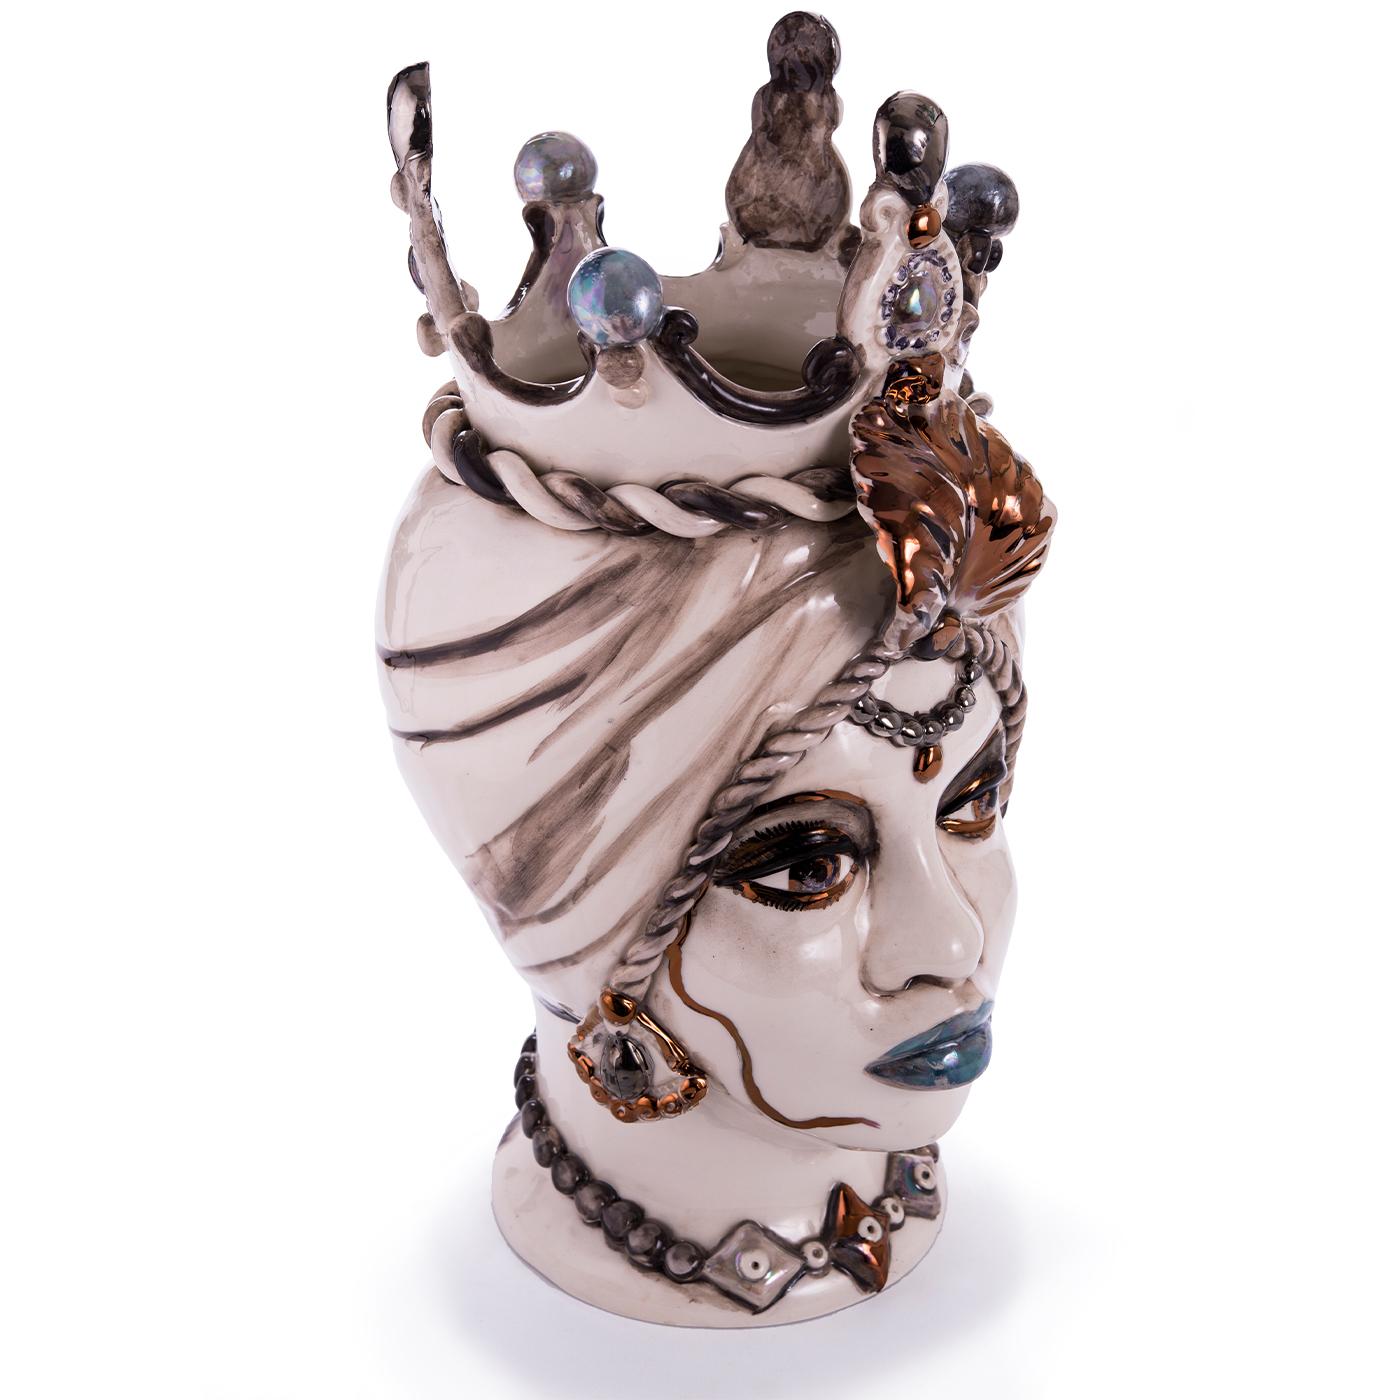 The Moor's head vase is an iconic Sicilian ceramic inspired by a legend of love and revenge between a Moor and a maiden which dates back to the period of the Arab occupation in Sicily. This exquisite modern interpretation of the traditional Sicilian